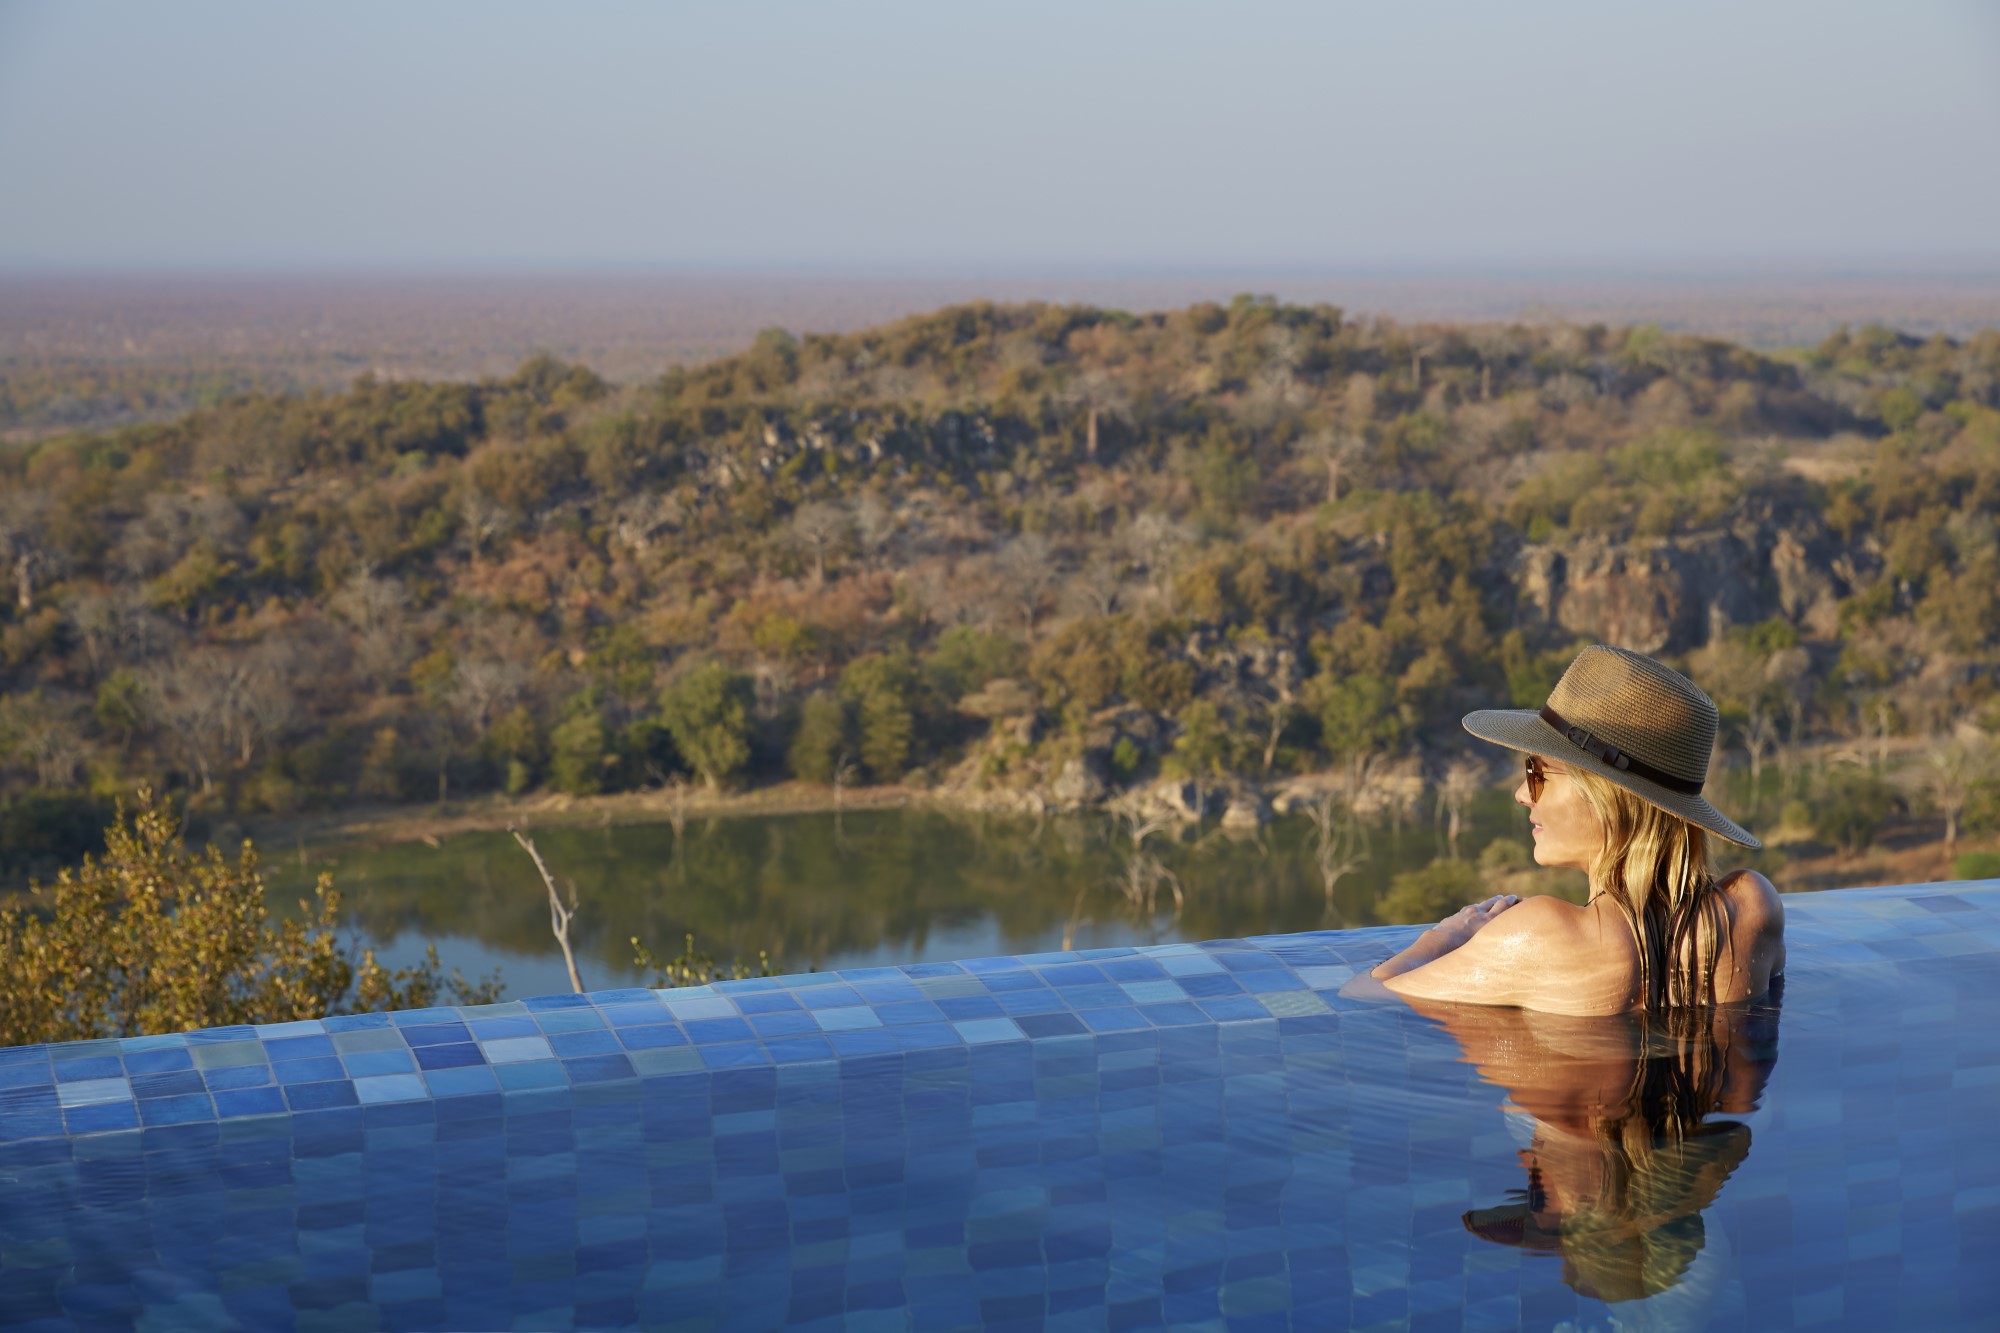 Singita-Malilangwe-House-Pool-with-a-view resized